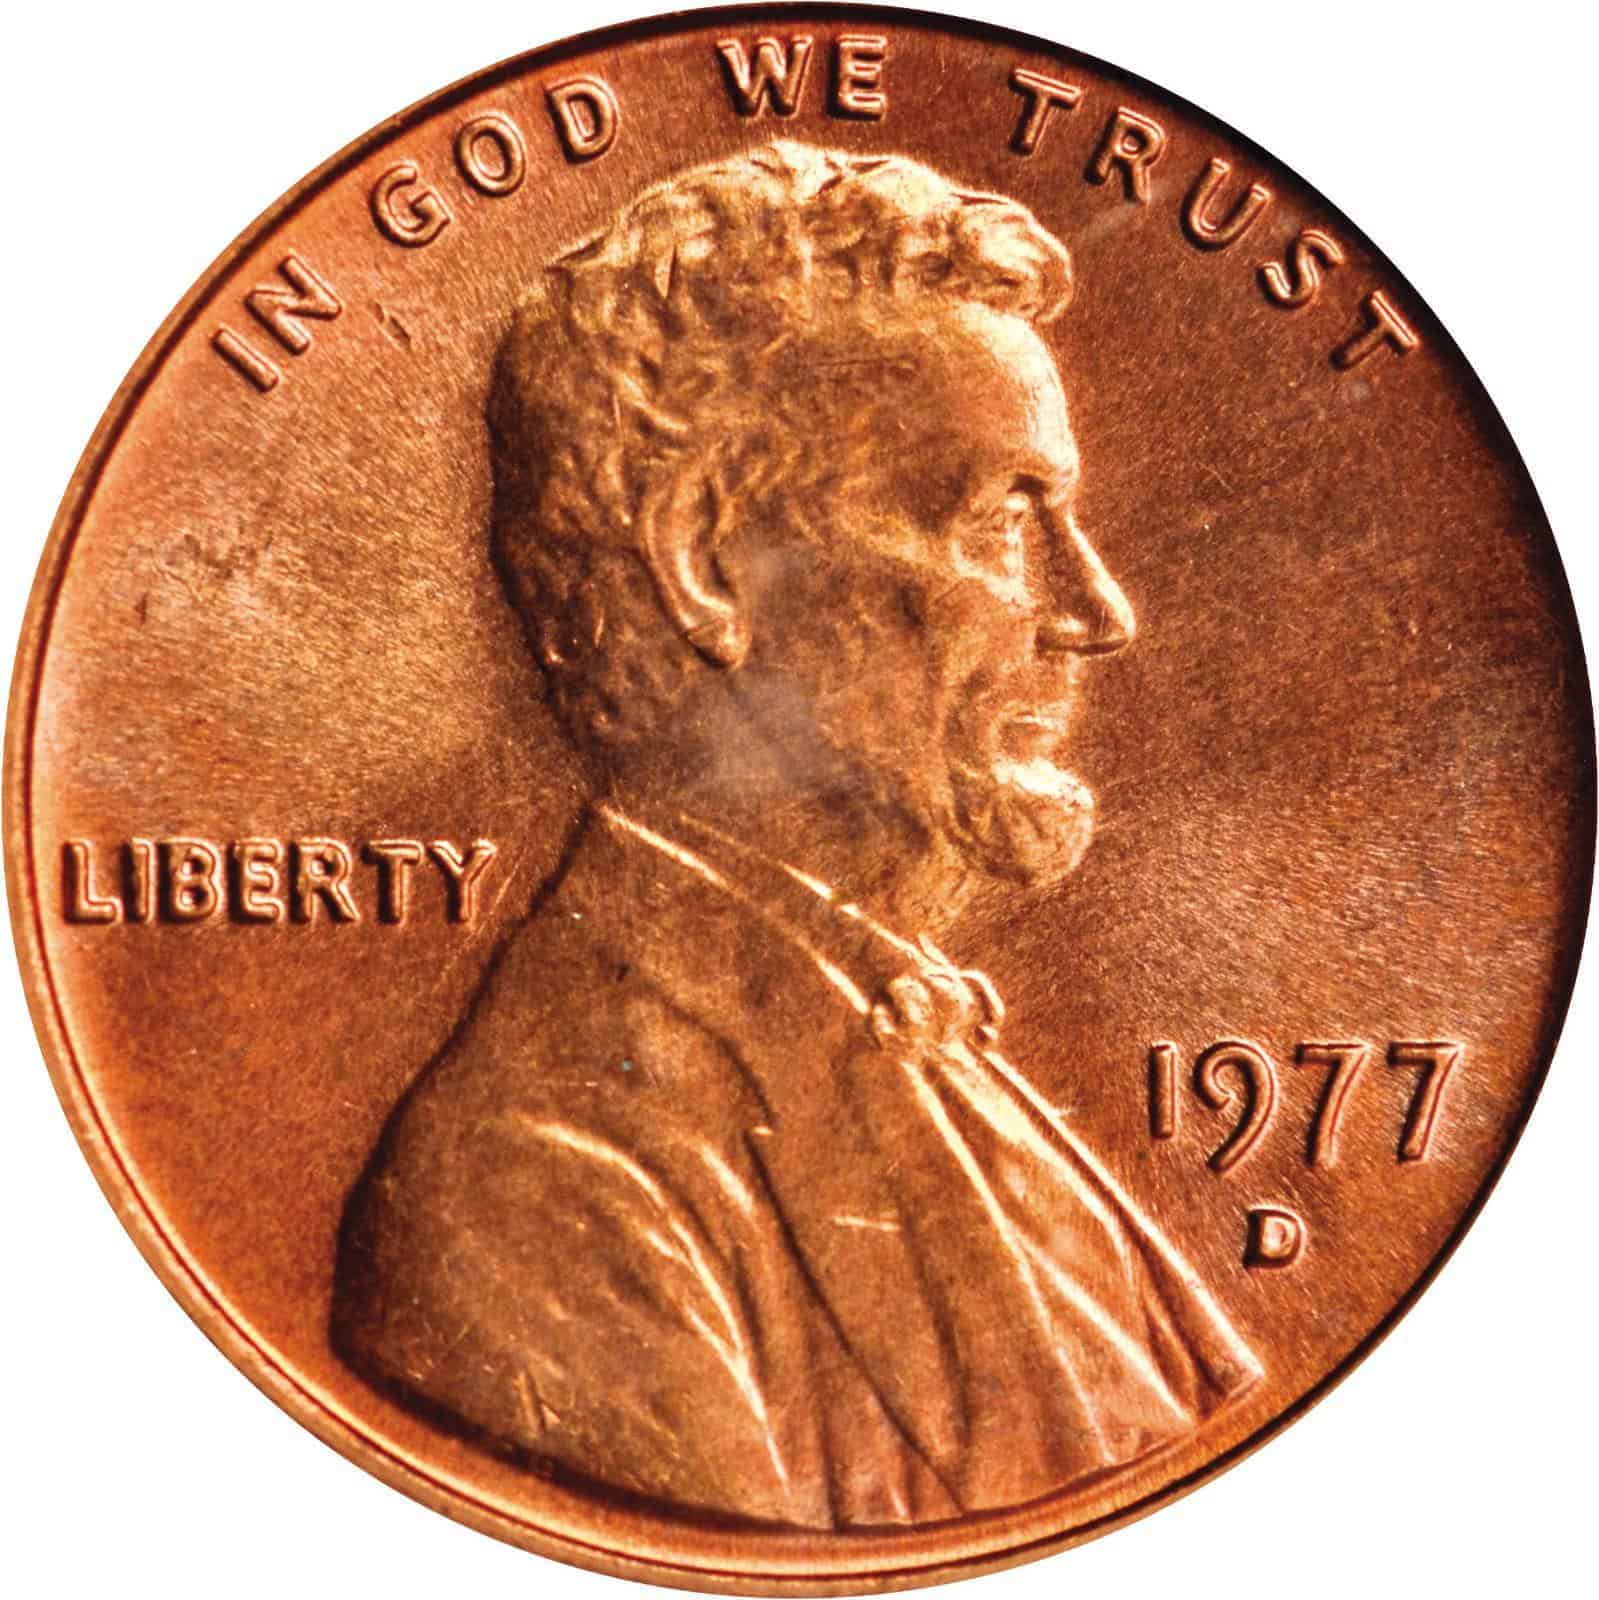 1977 Penny Value